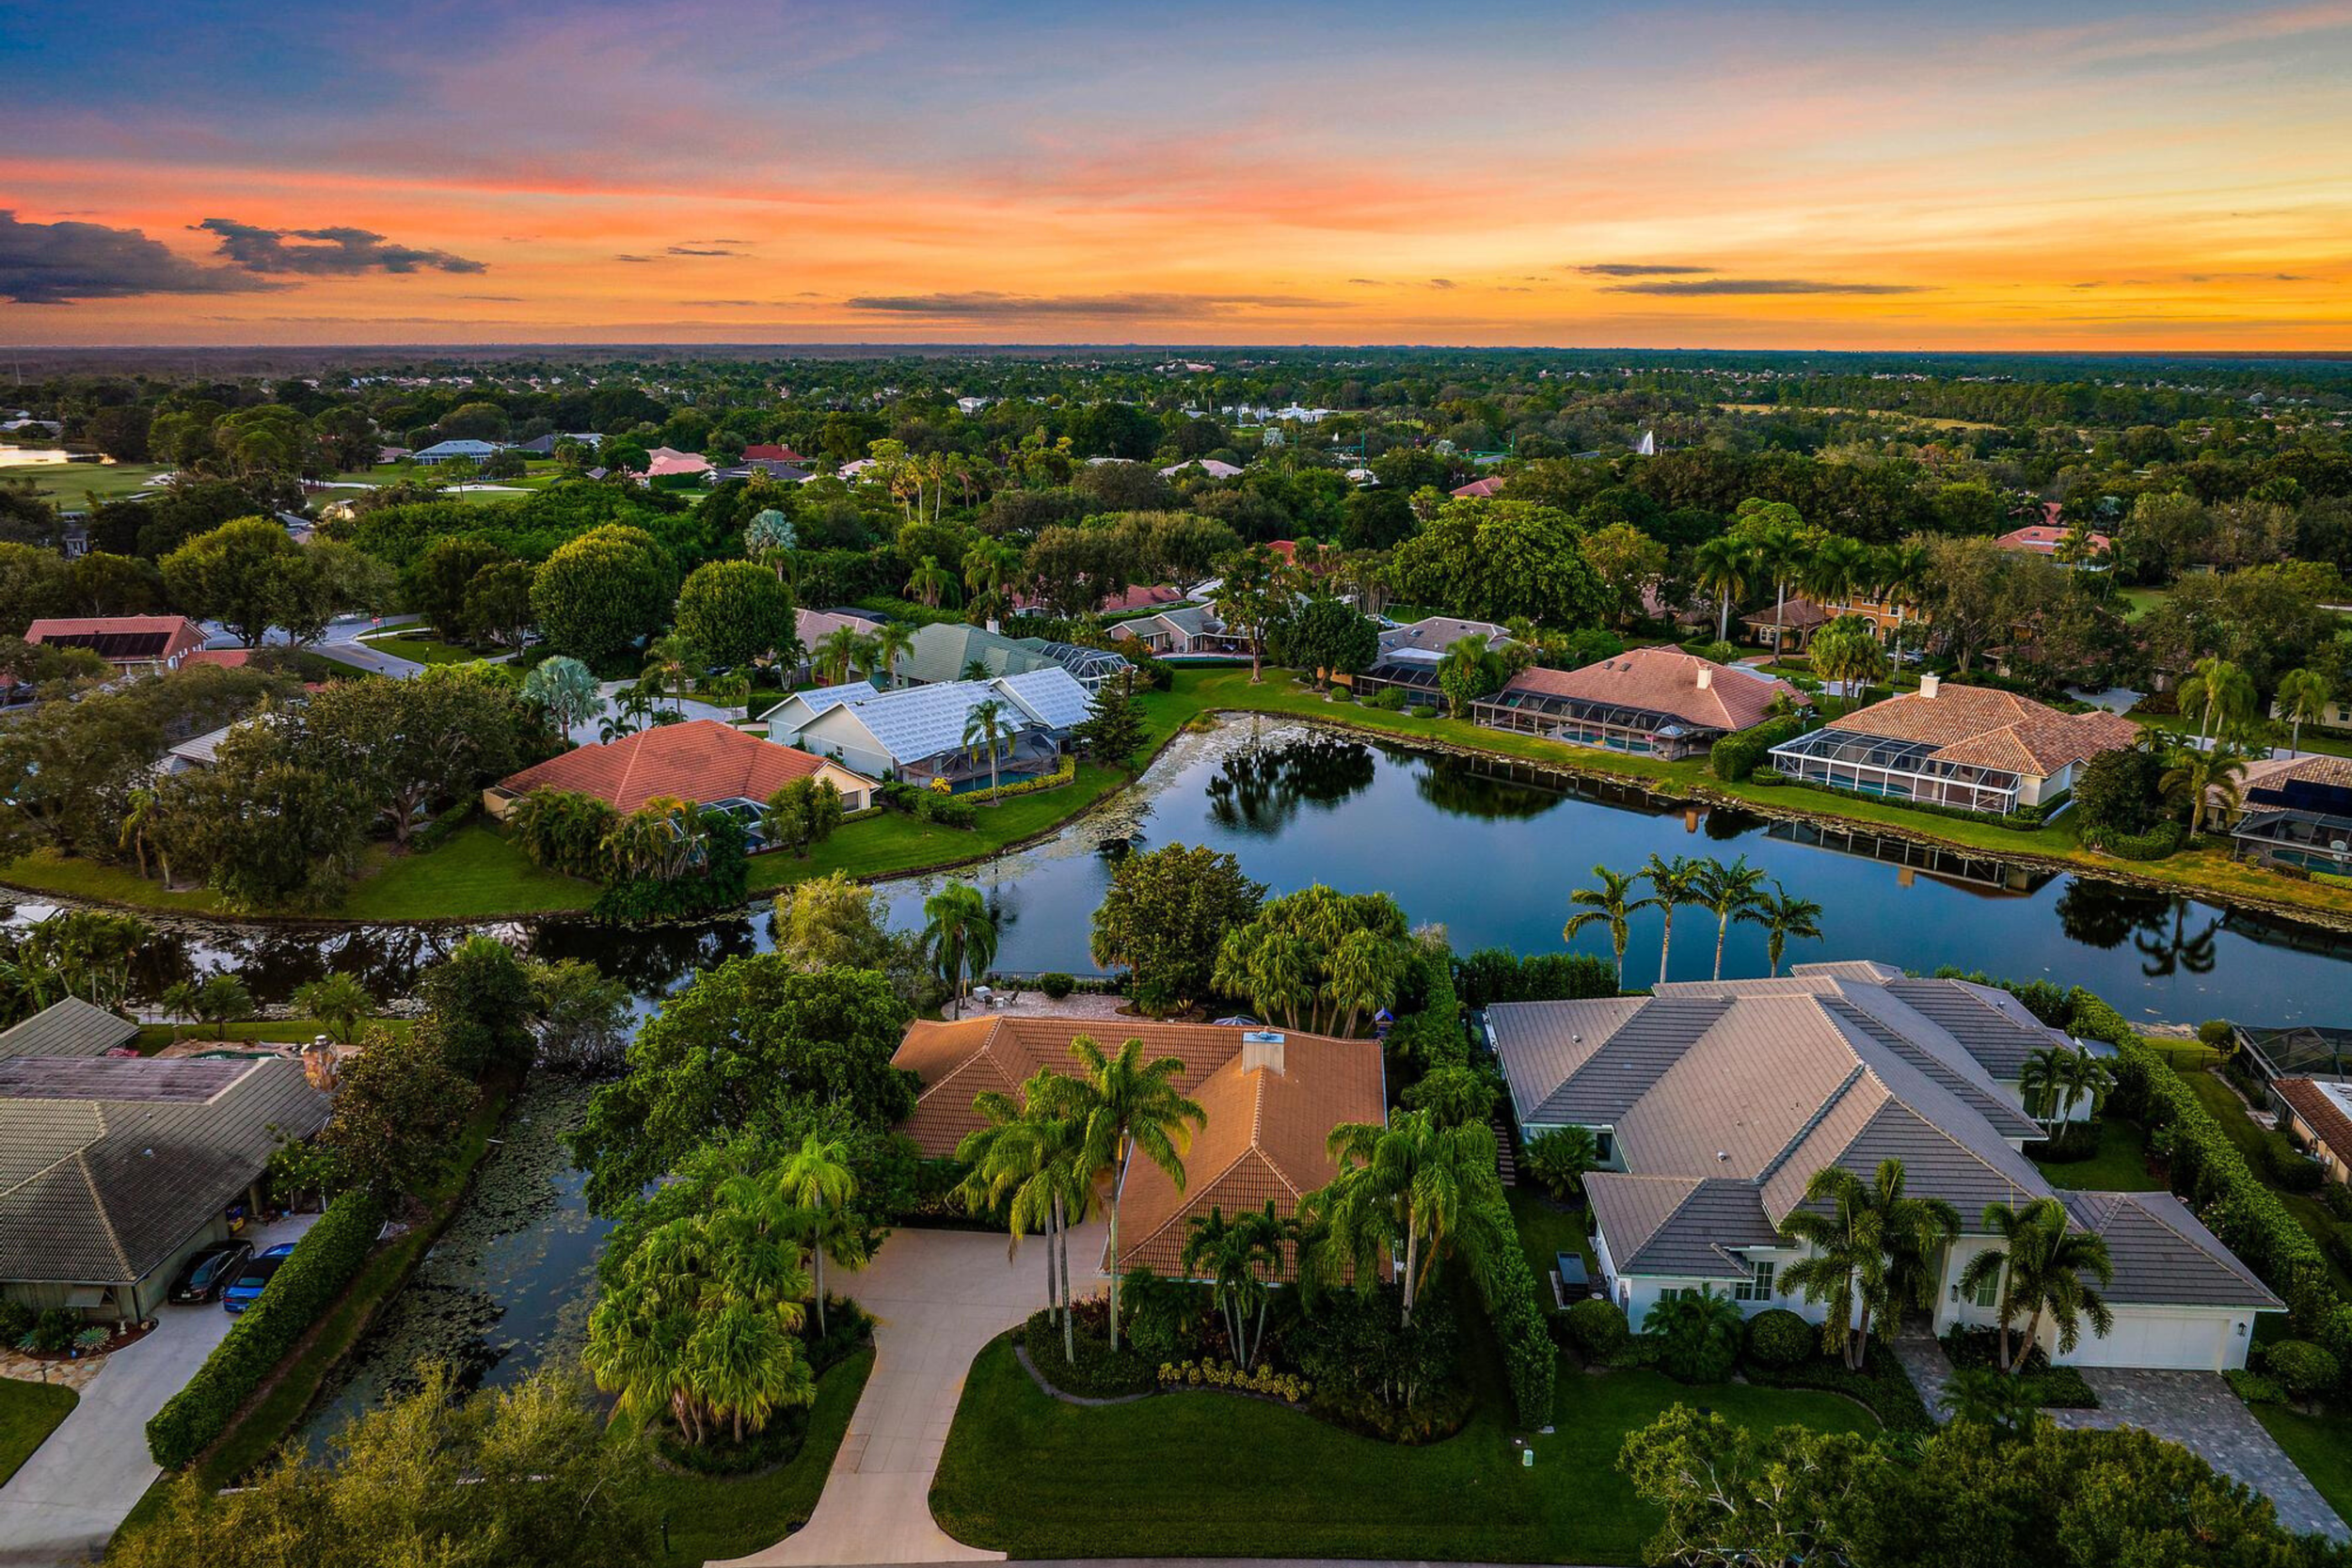 lakefront home with pool and big backyard in pga national